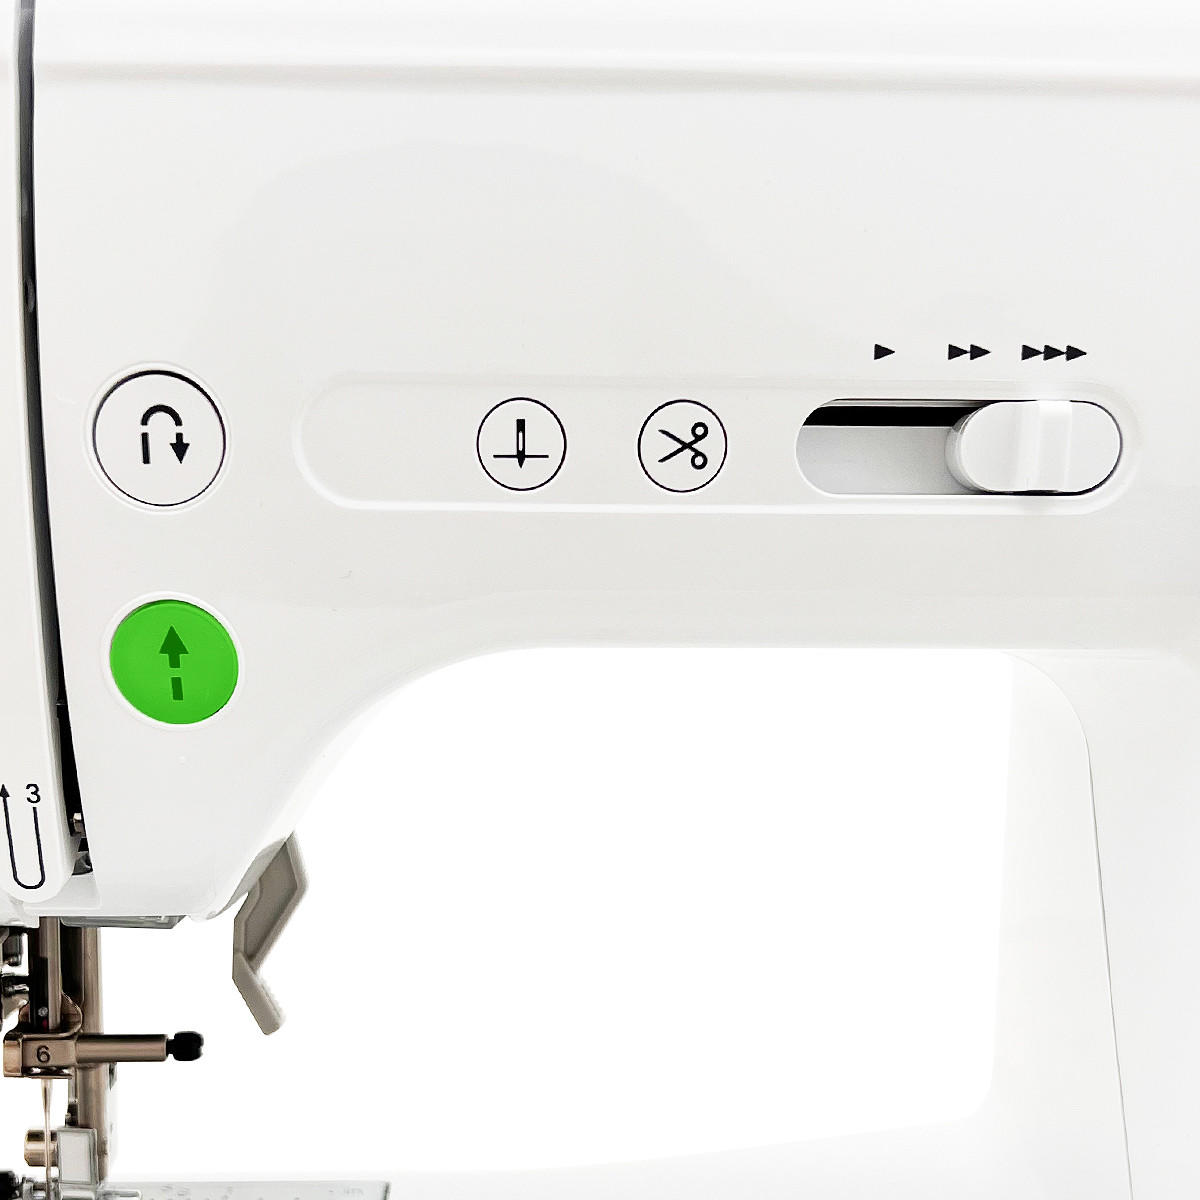 Brother SE630 Sewing Machine for sale online